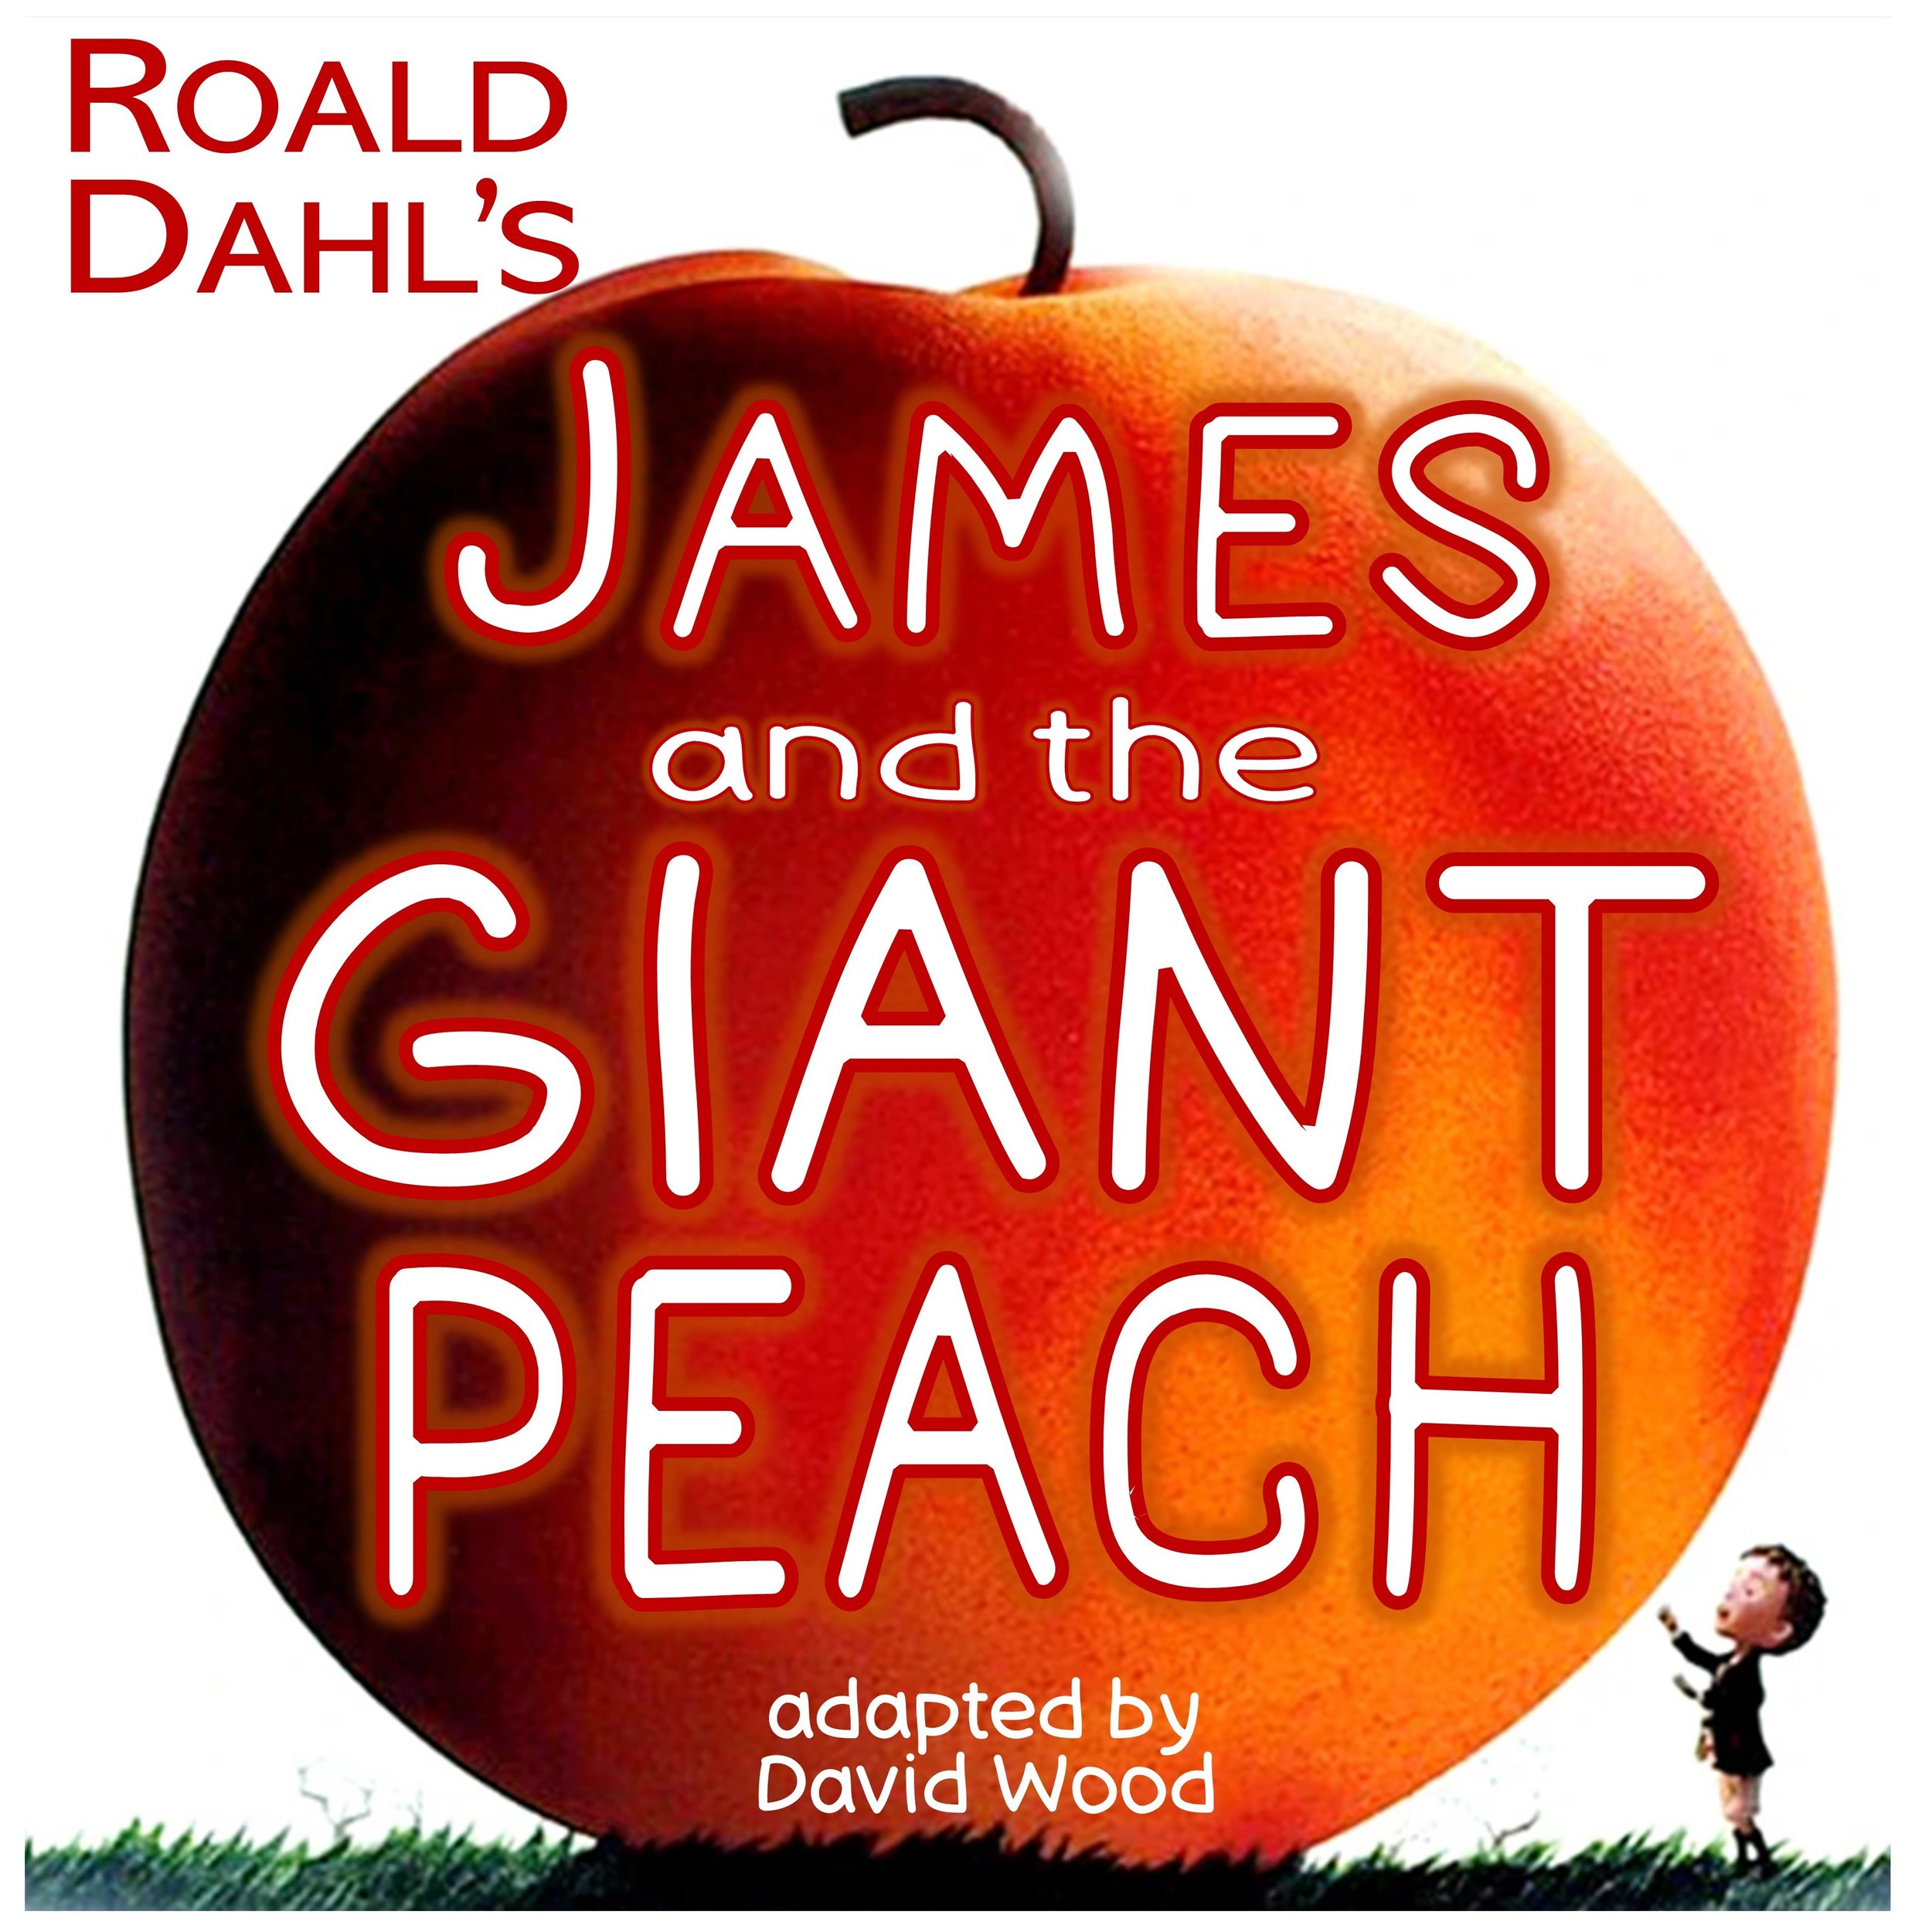 James and the Giant Peach - Audition Date 4th September 2022